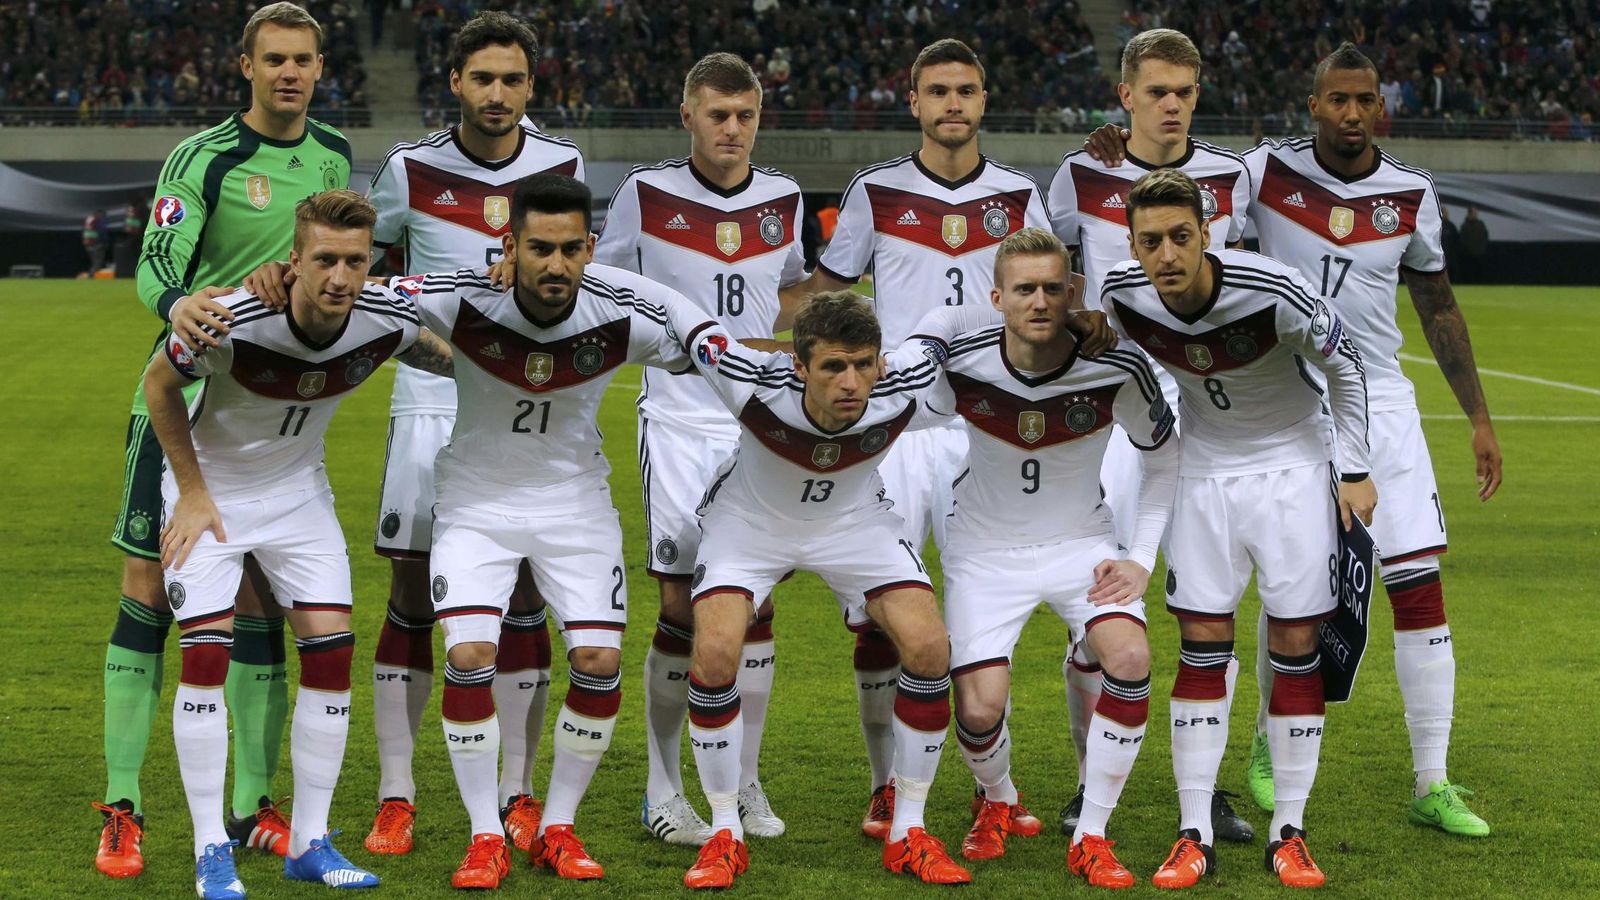 Foto: Germany players pose for team photo prior to Euro 2016 qualification soccer match against Georgia in Leipzig